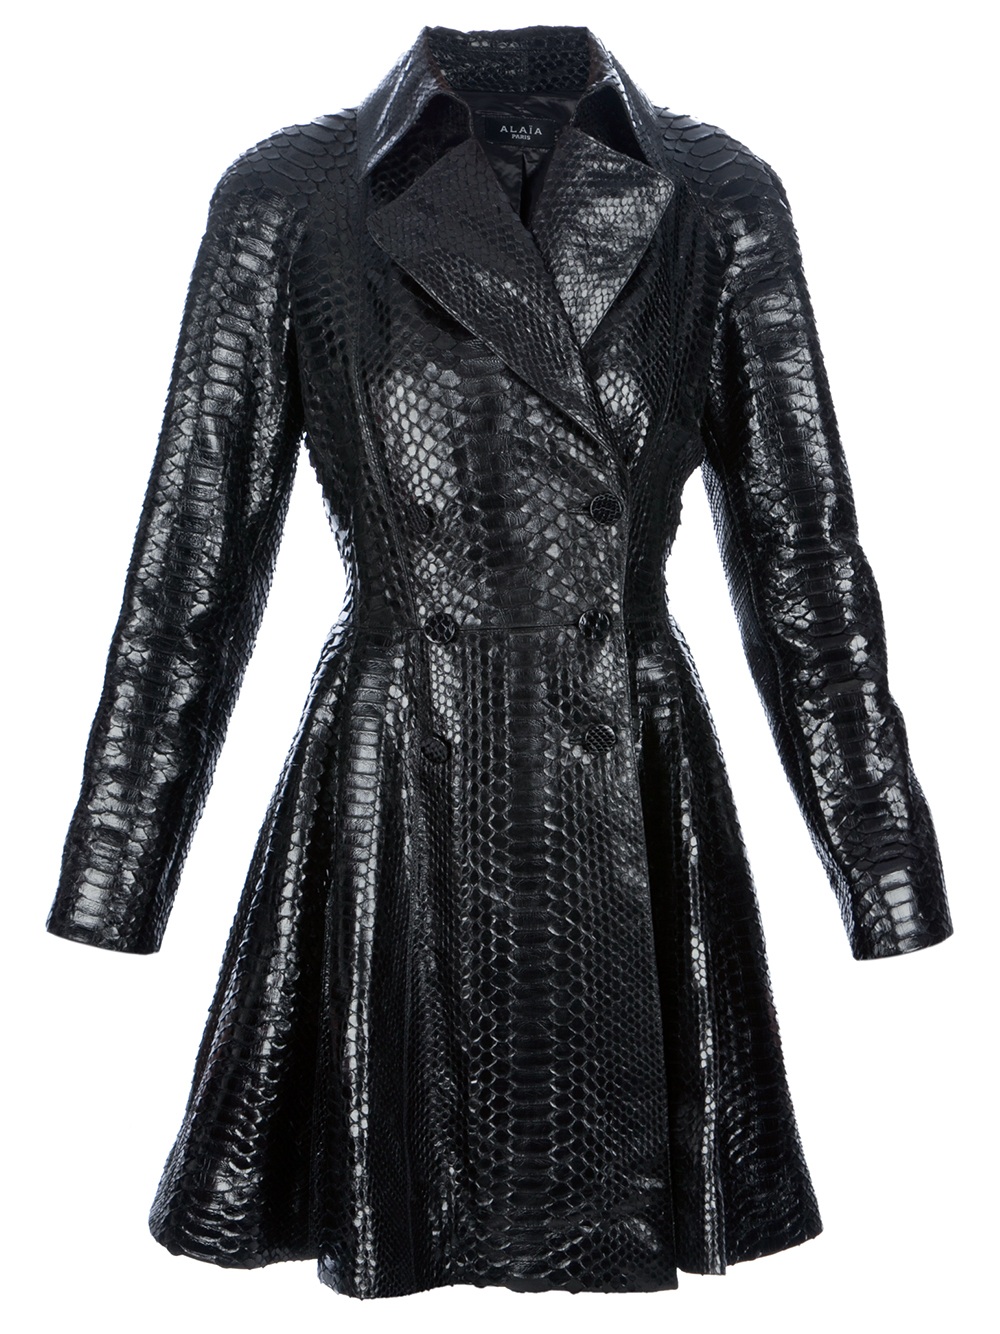 Alaïa Double Breasted Python Coat in Black | Lyst